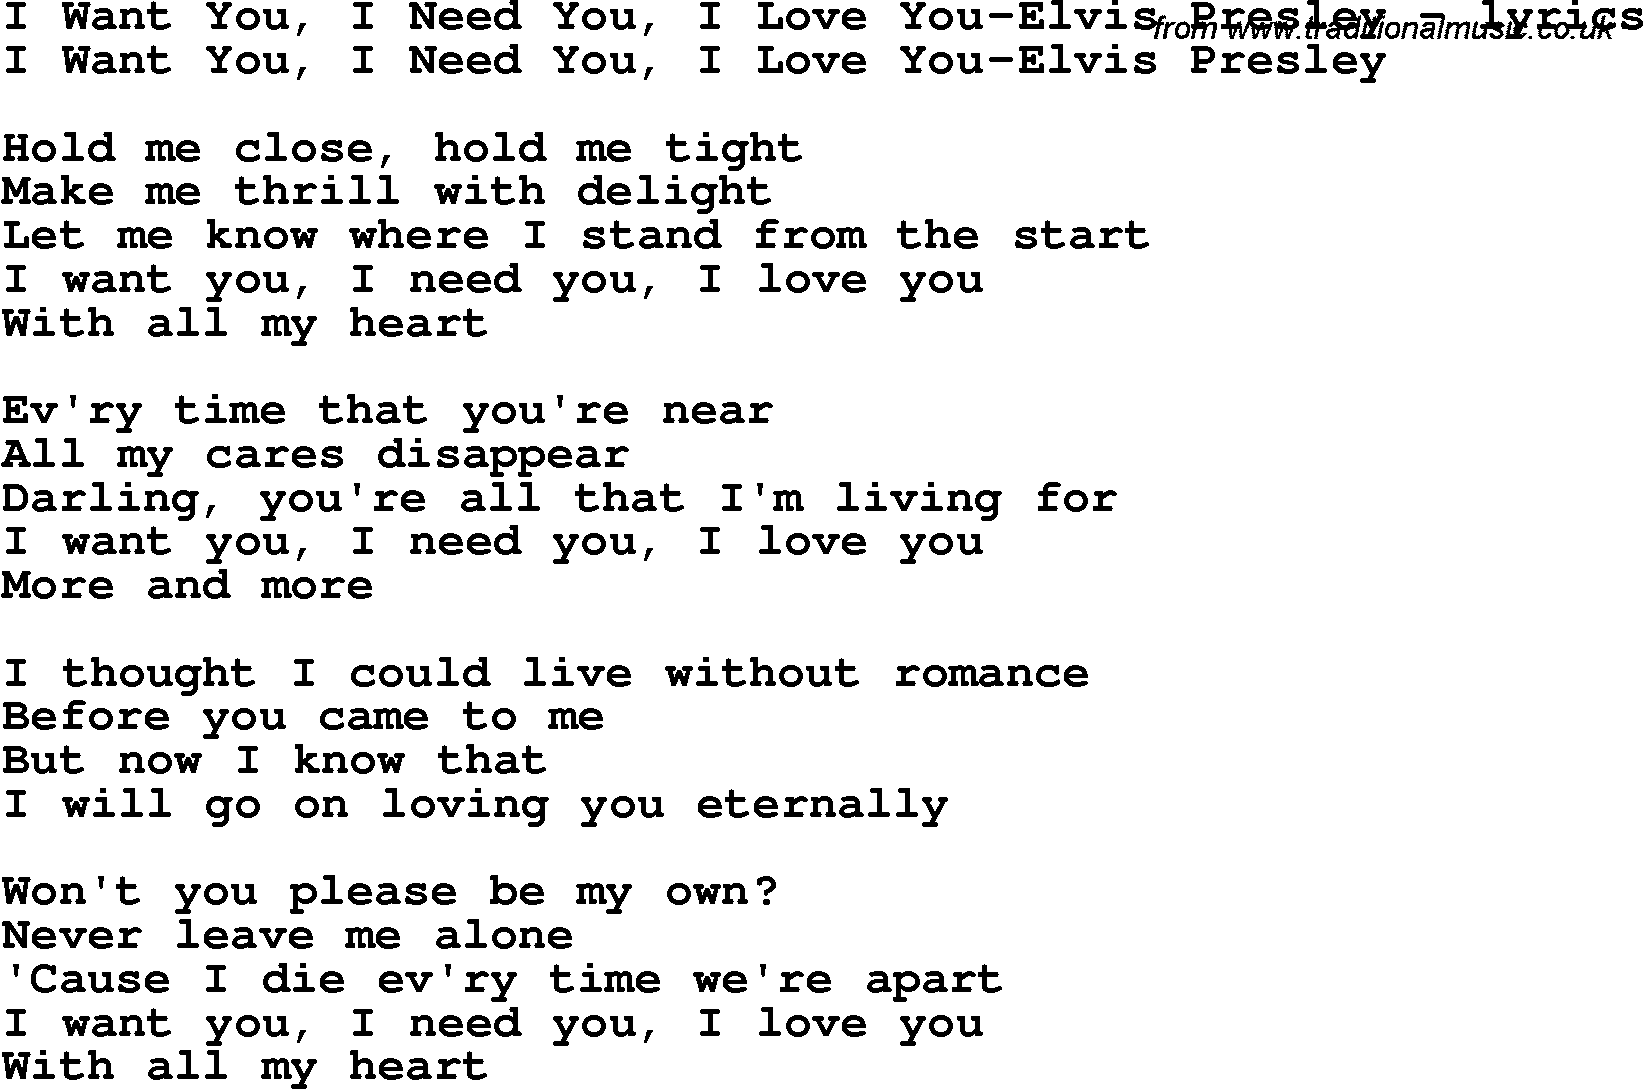 Love Song Lyrics for: I Want You, I Need You, I Love You-Elvis Presley